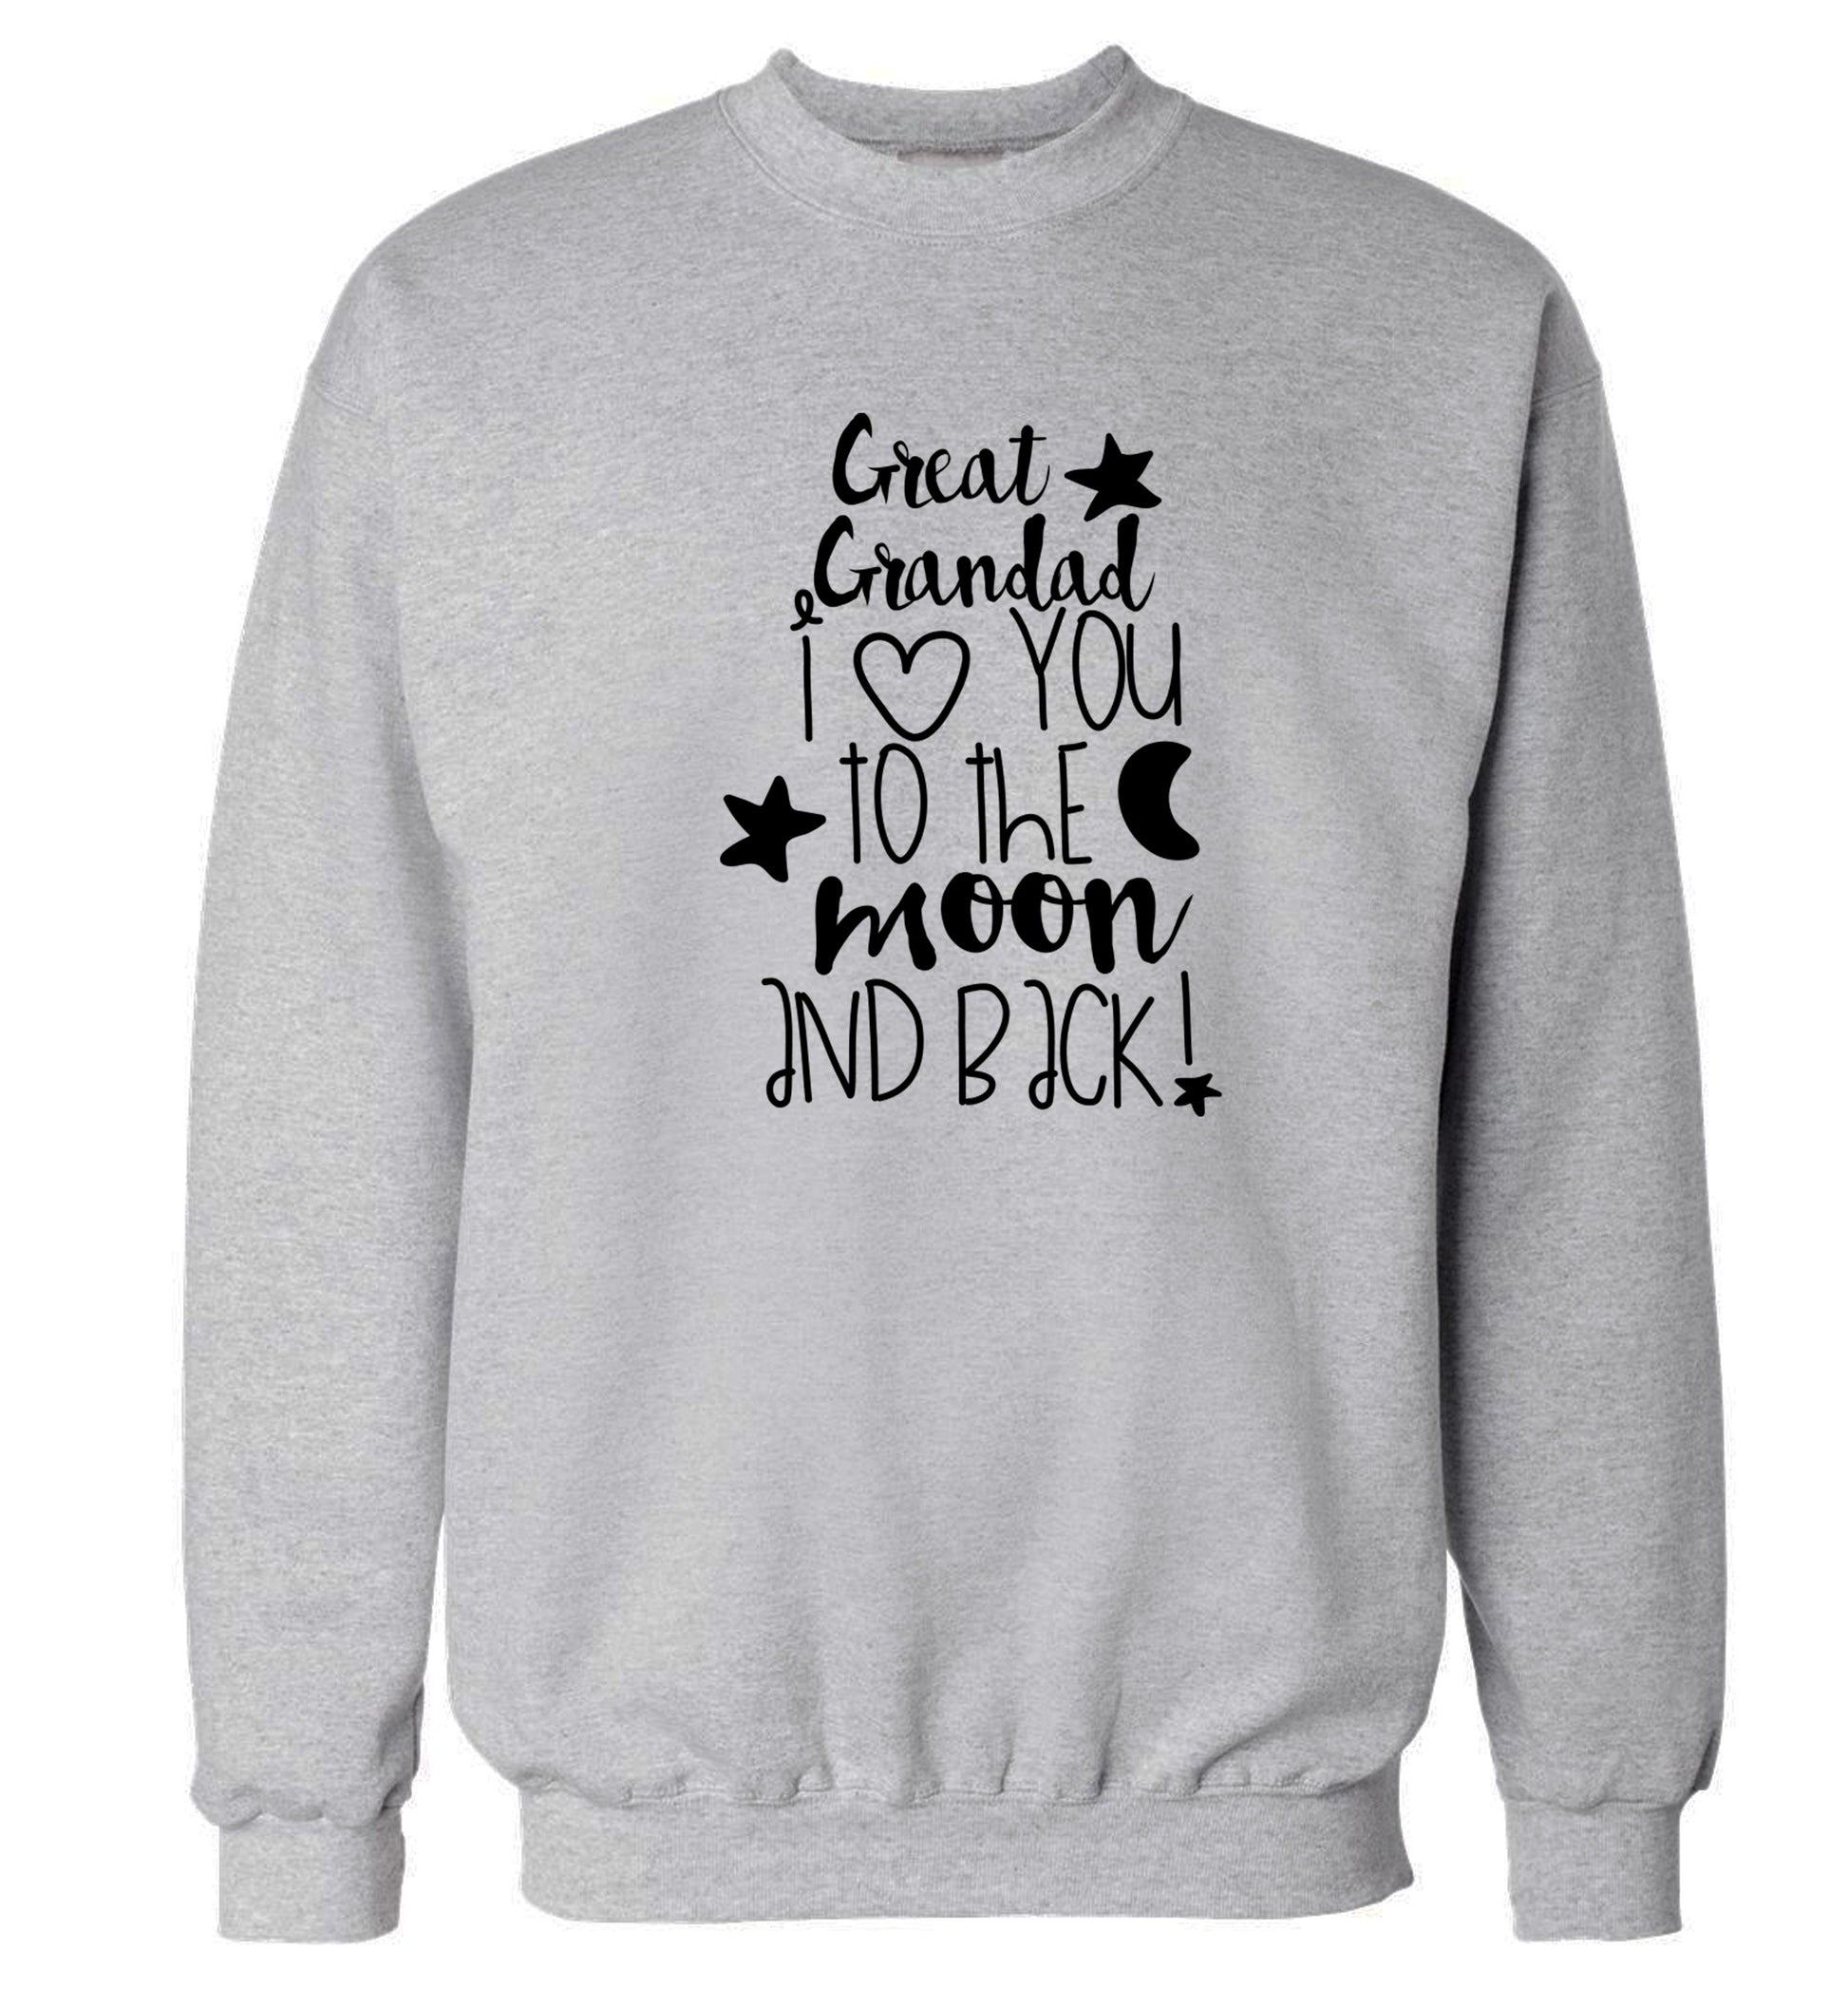 Great Grandad I love you to the moon and back Adult's unisex grey  sweater 2XL